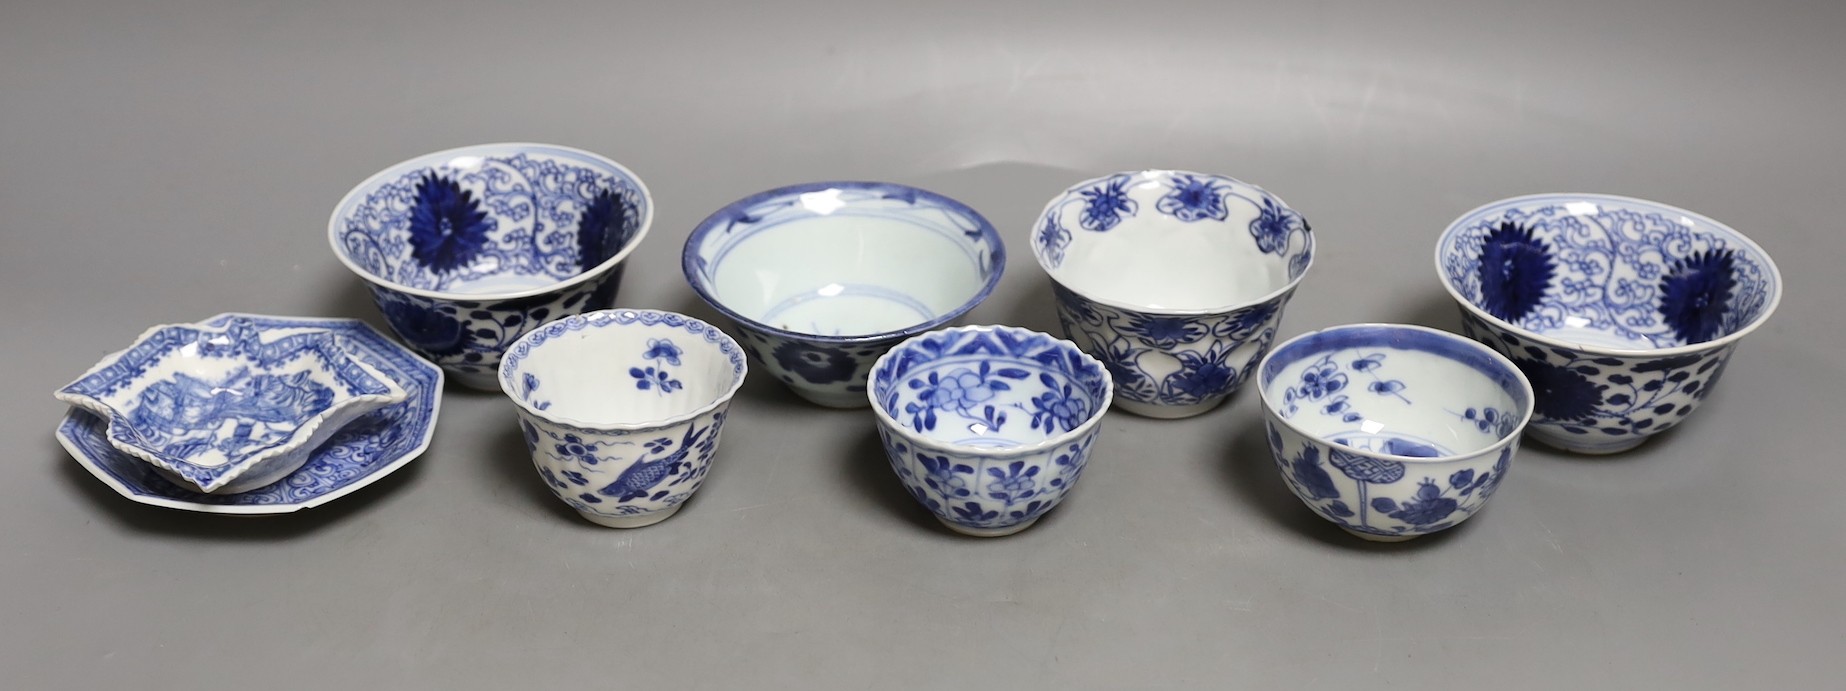 A group of Chinese blue and white tea bowls, 18th century a saucer and a in English porcelain leaf dish